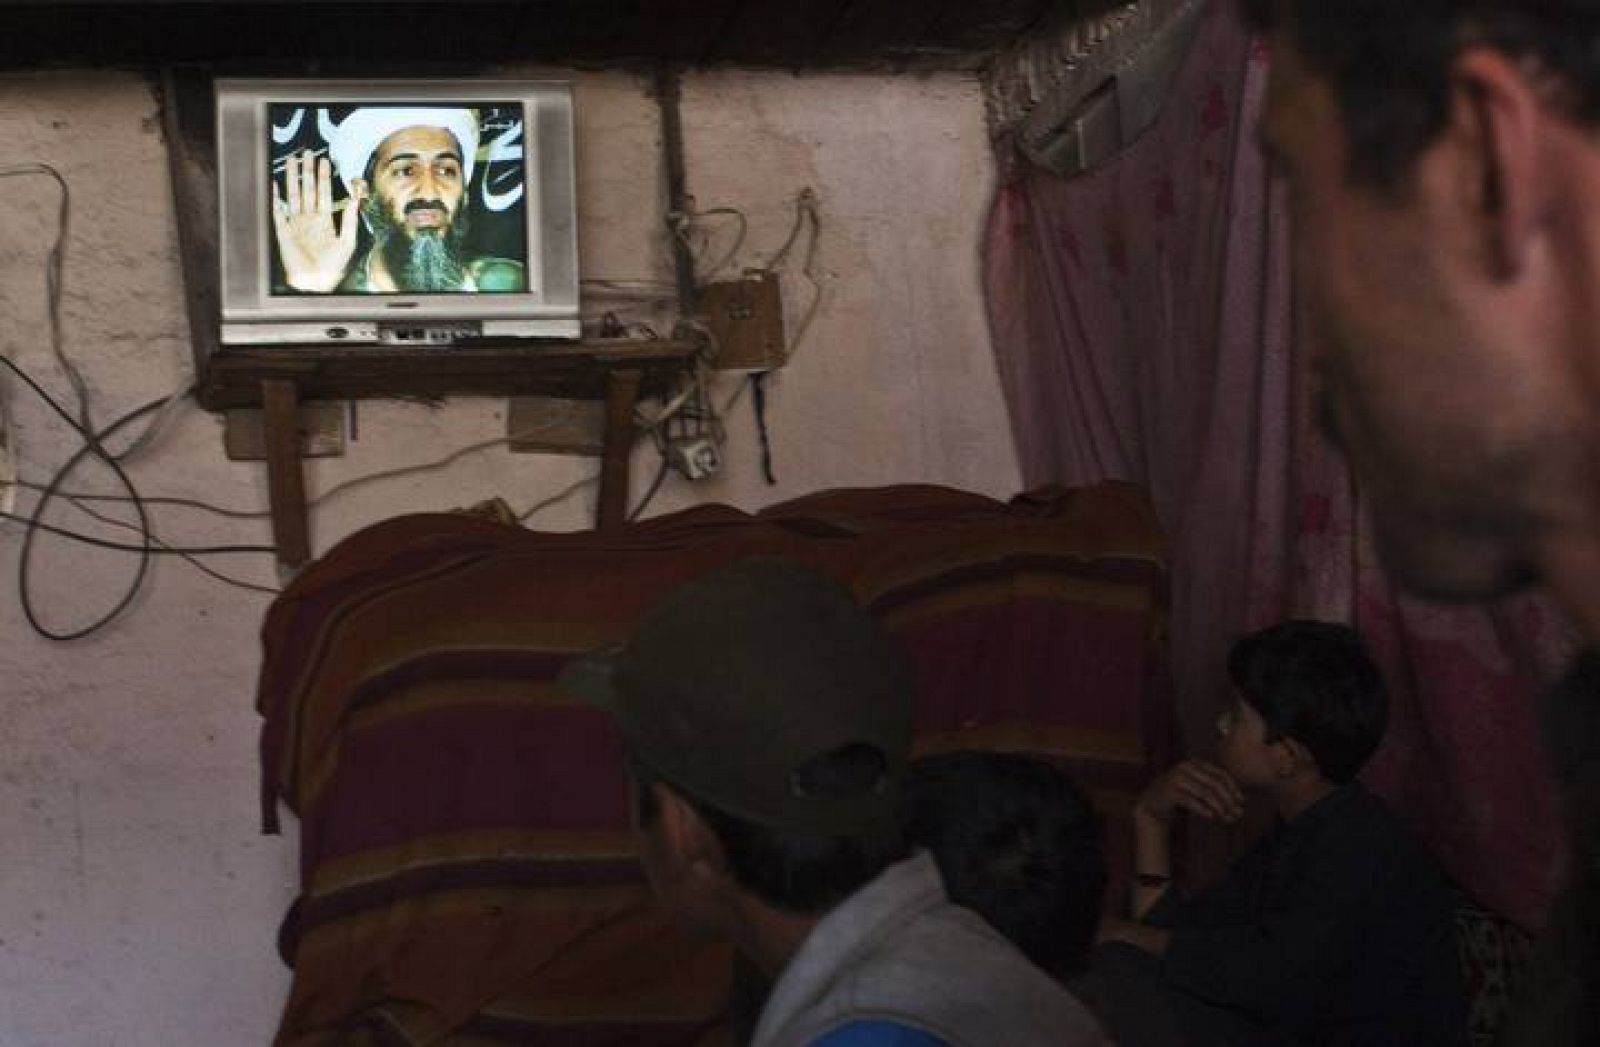 Locals watch an Afghan local television channel news telecast about Osama Bin Laden's death, at a resturant in Kabul